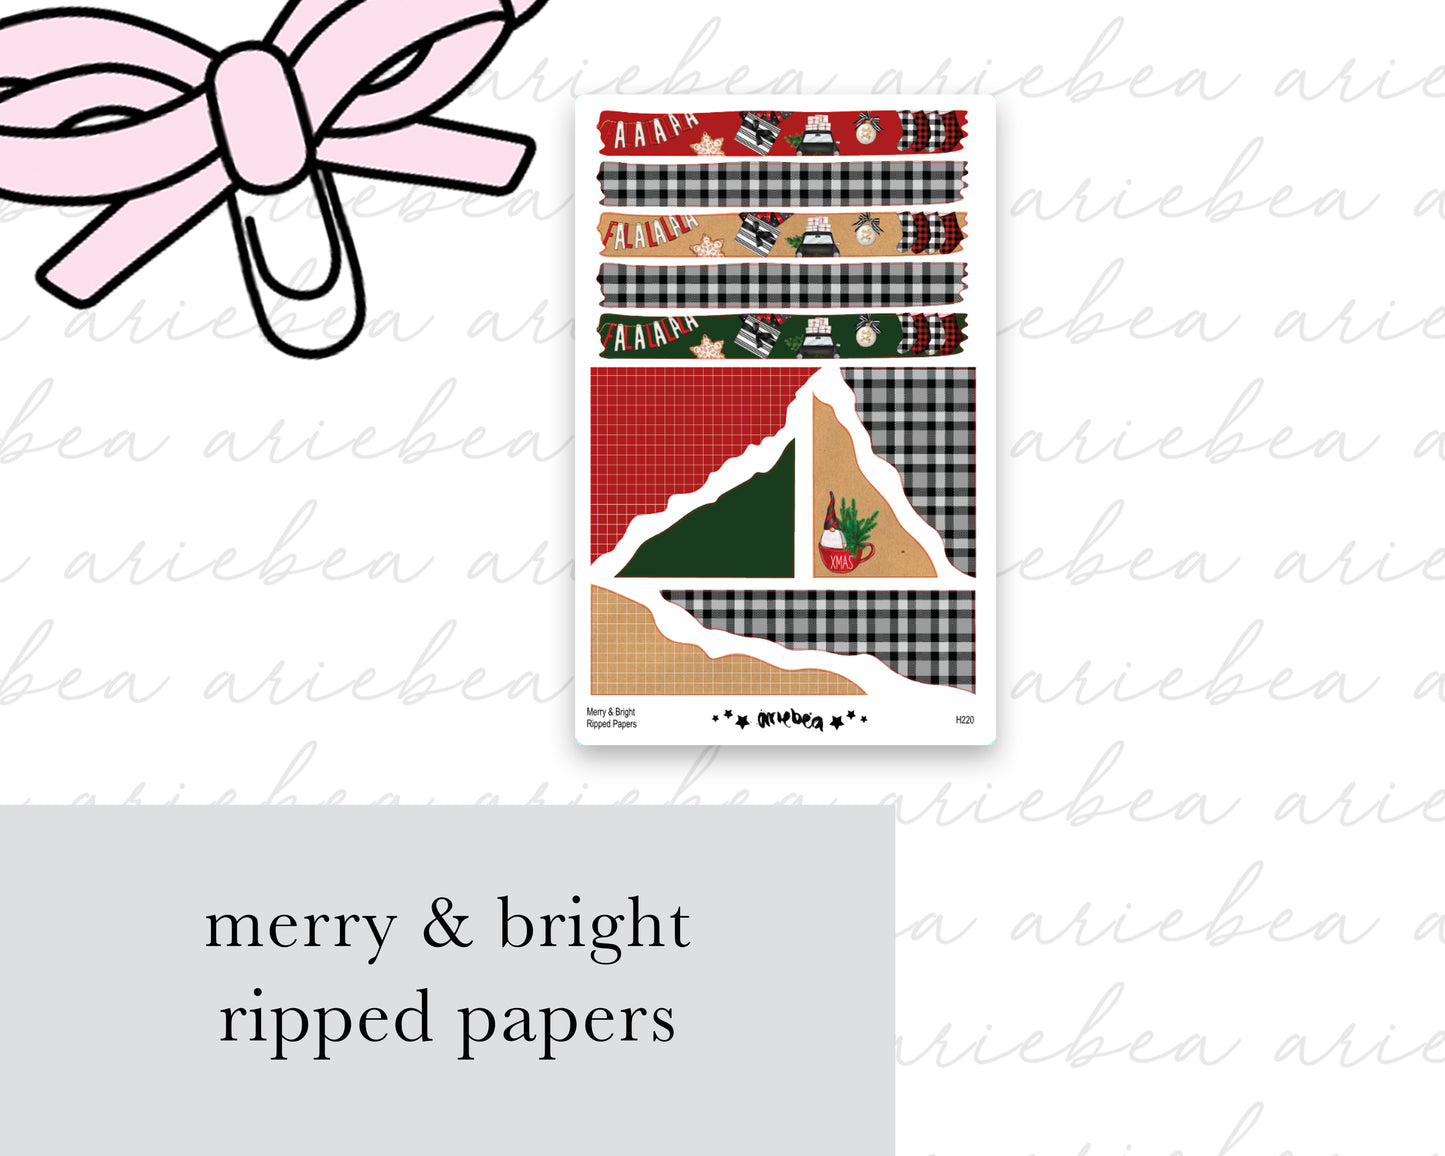 Merry & Bright Ripped Papers